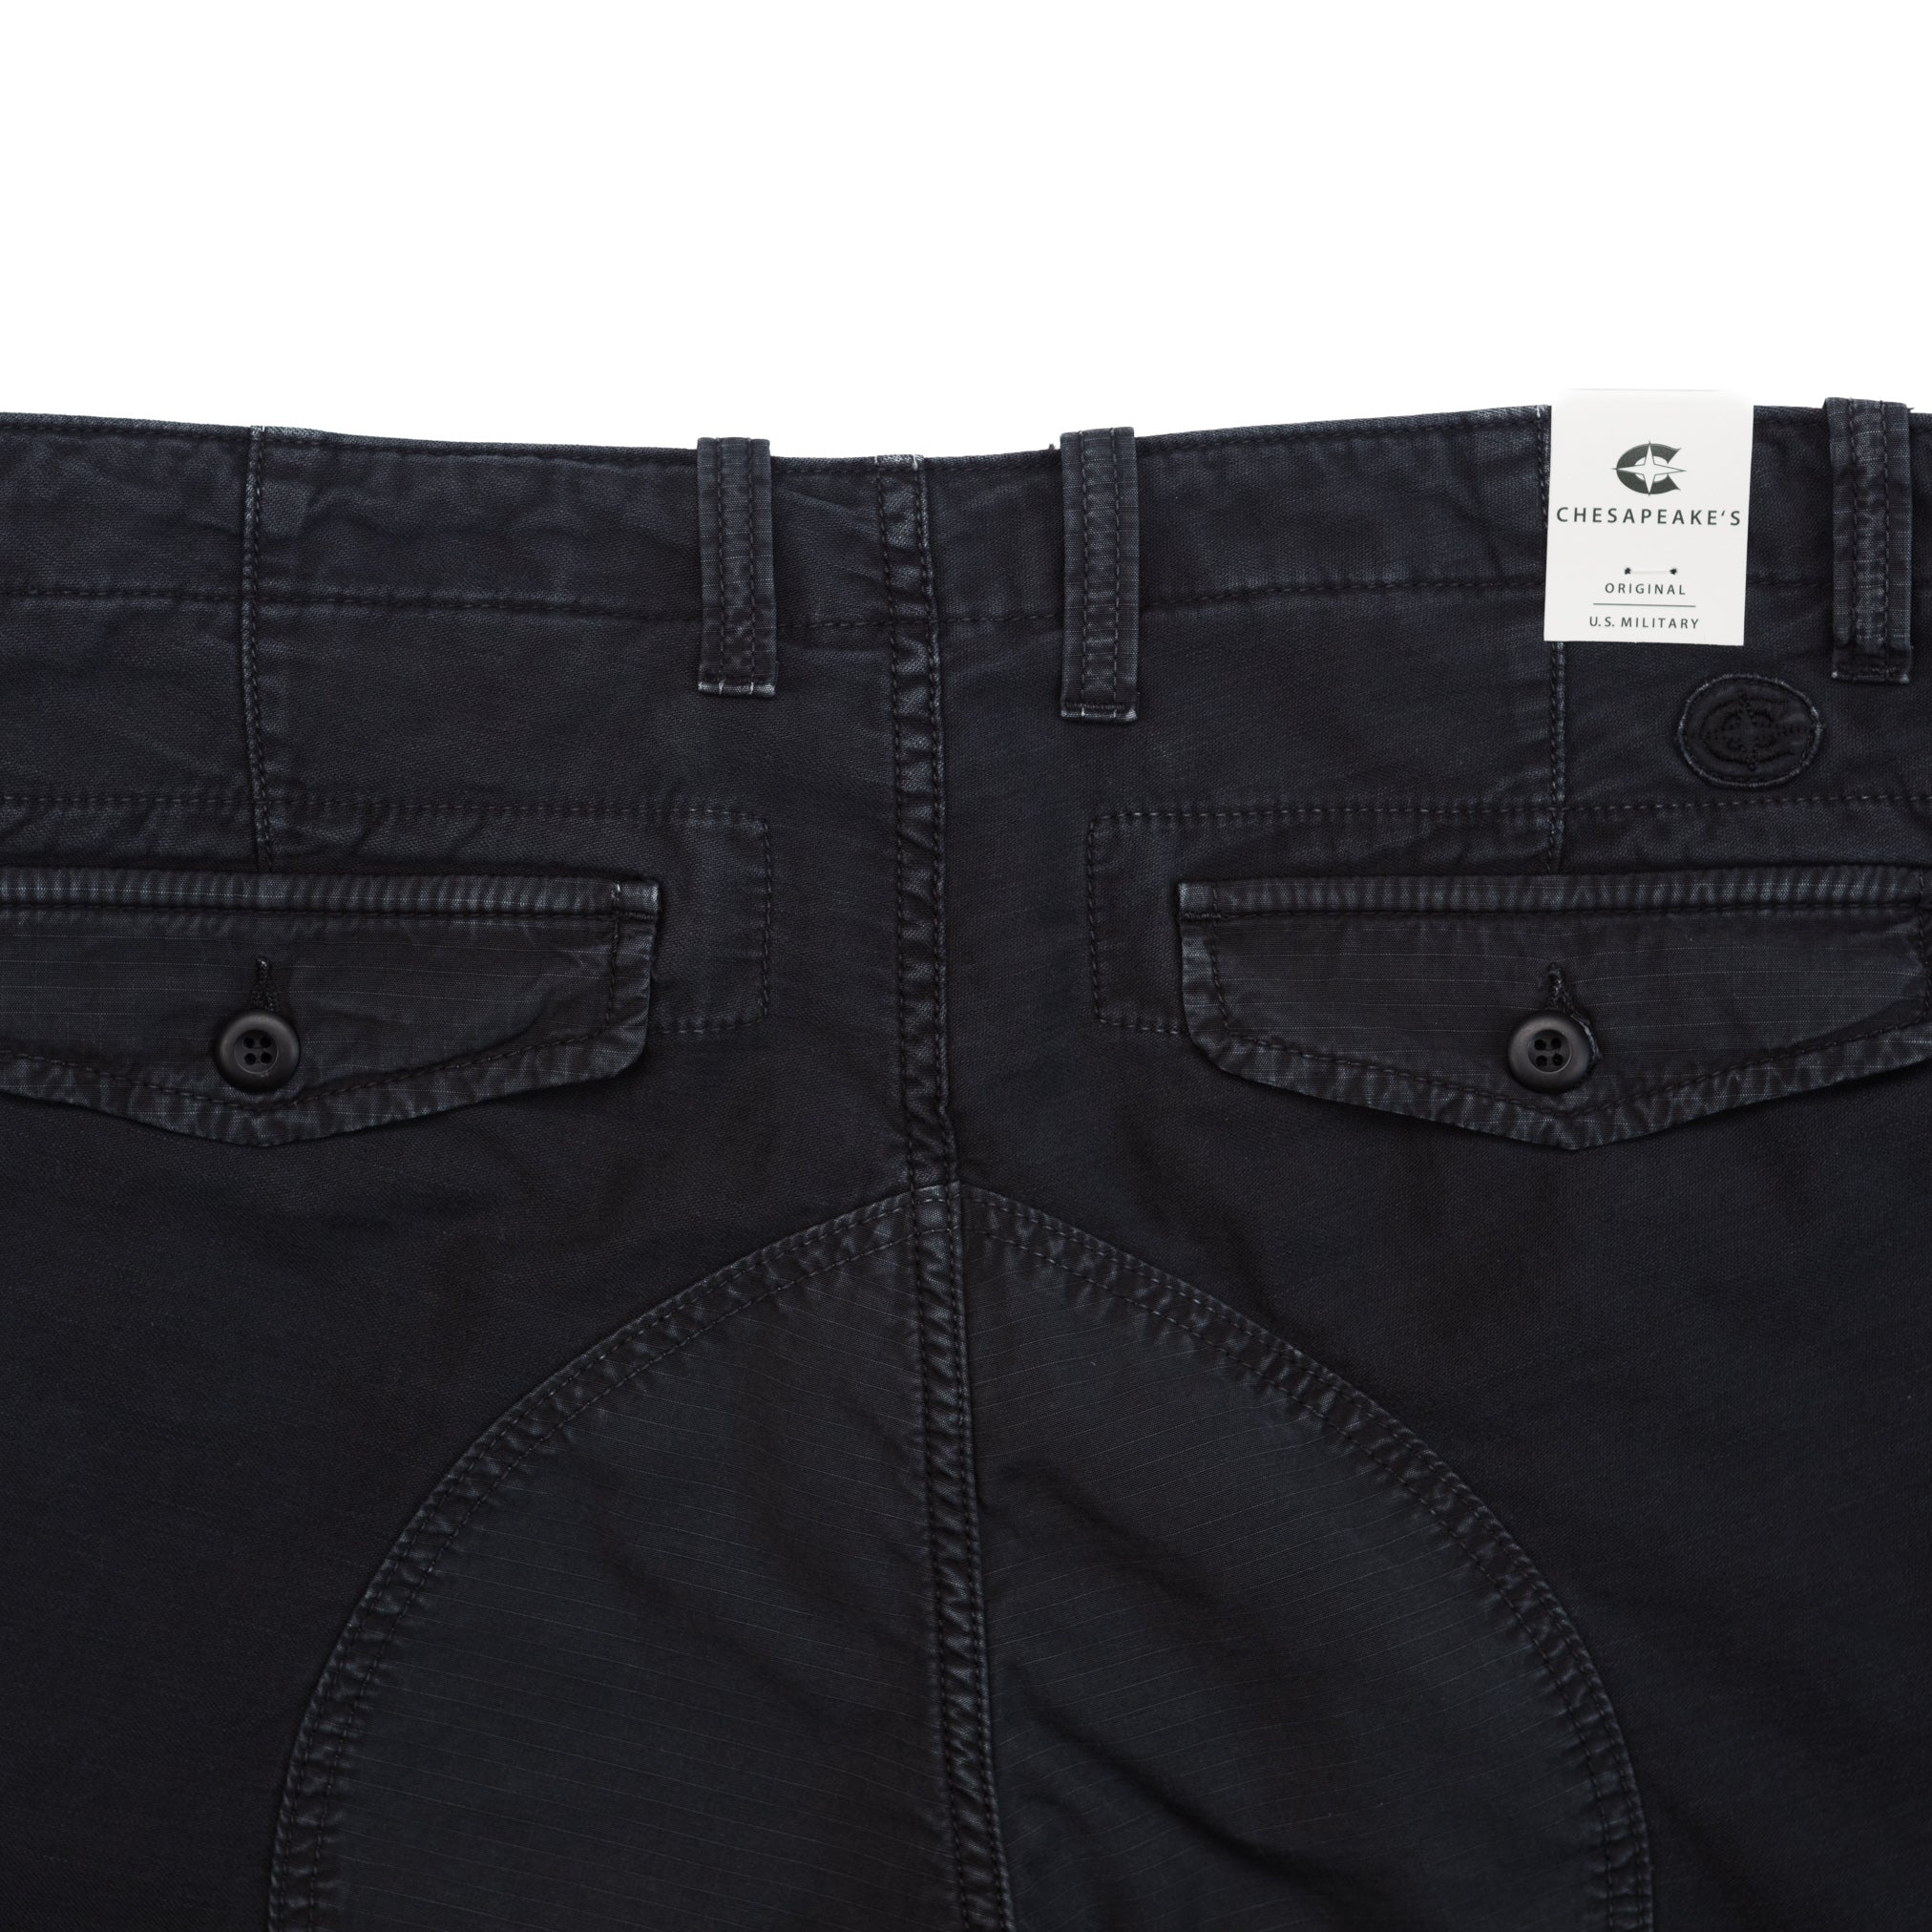 Harbour Deck Shorts in Faded Black